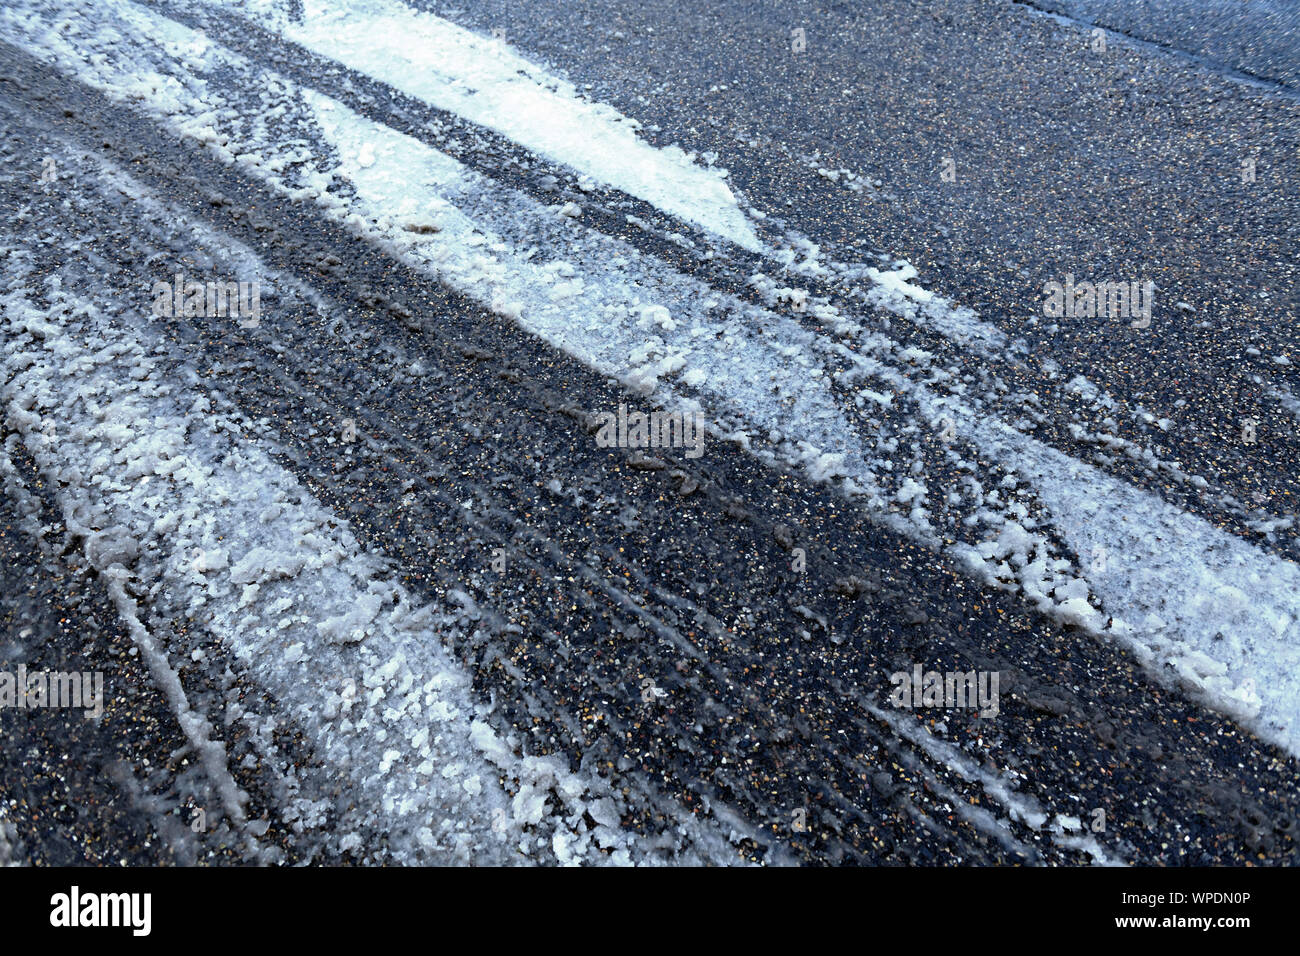 Tyre tracks detail on slippery, frosty snow-covered roads. Stock Photo